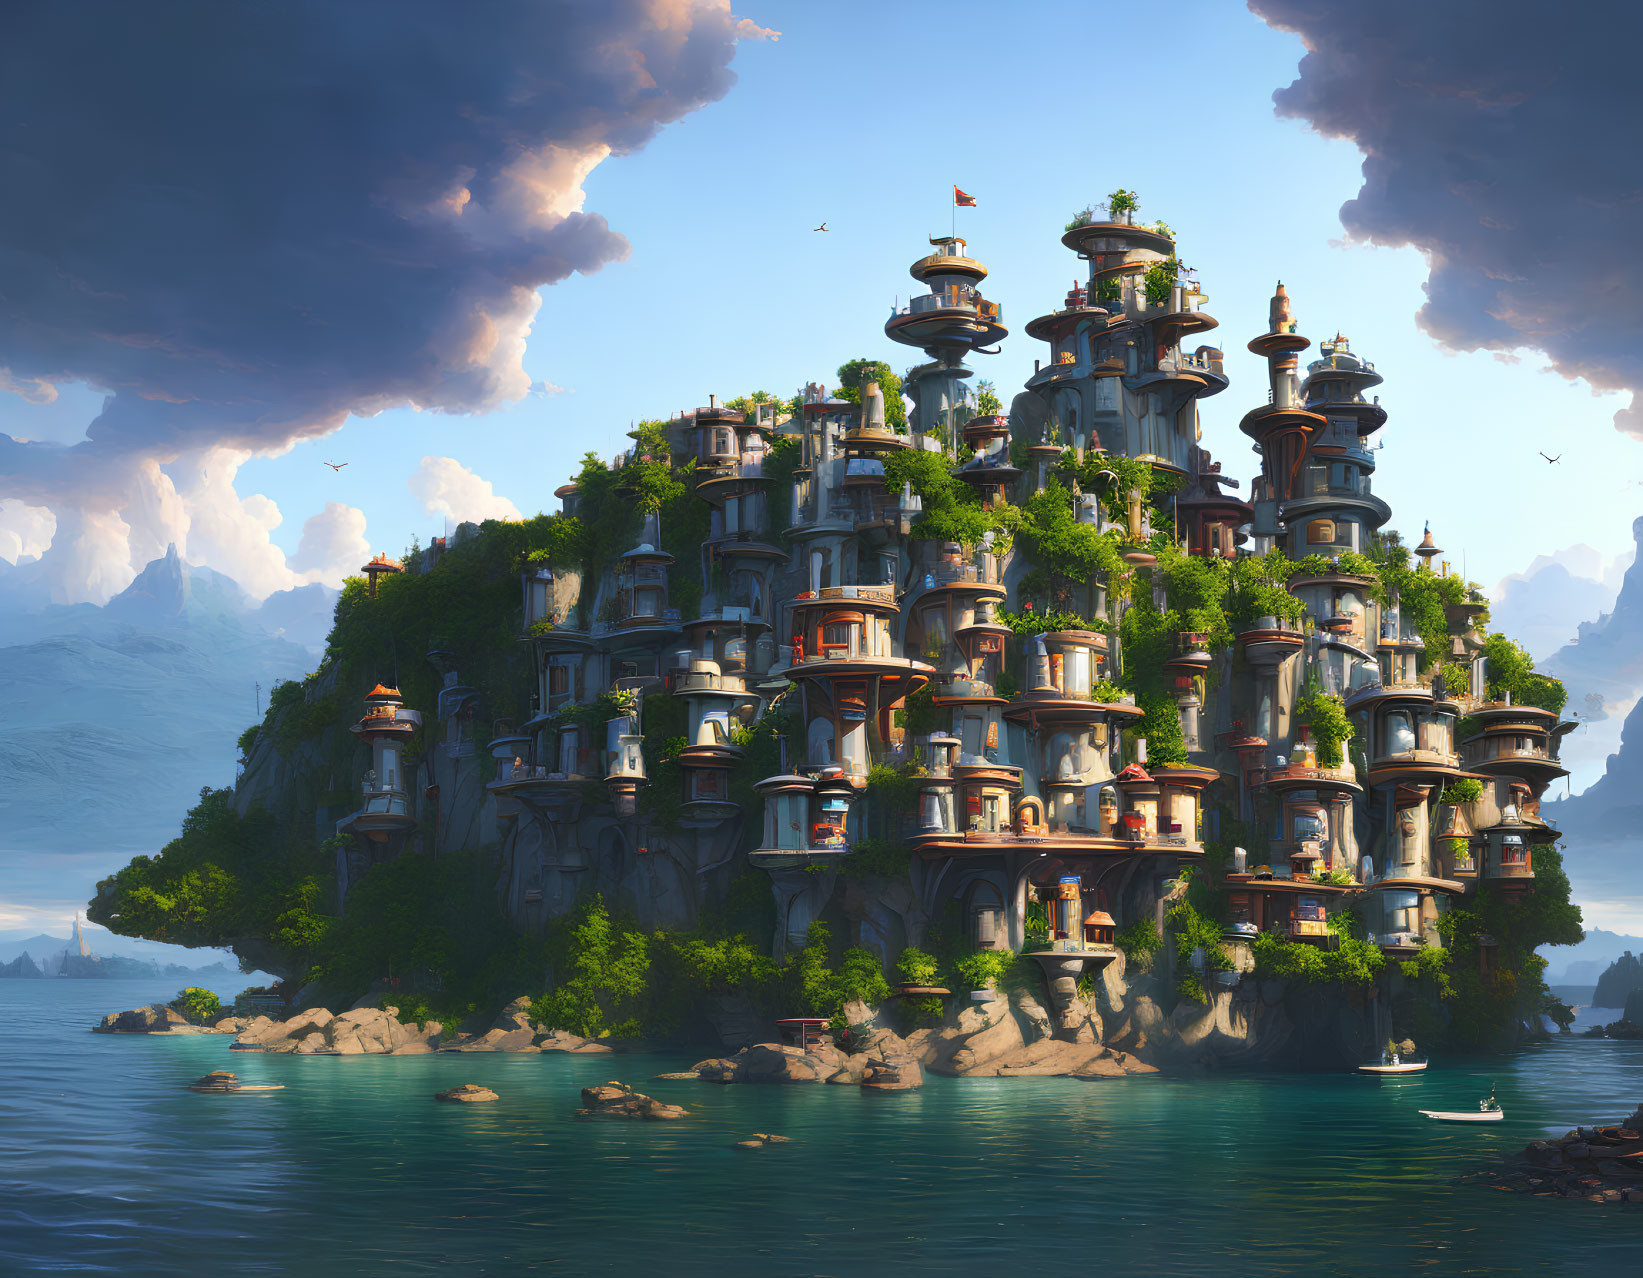 Fantastical island city with towering buildings and lush greenery against clear blue skies and calm waters